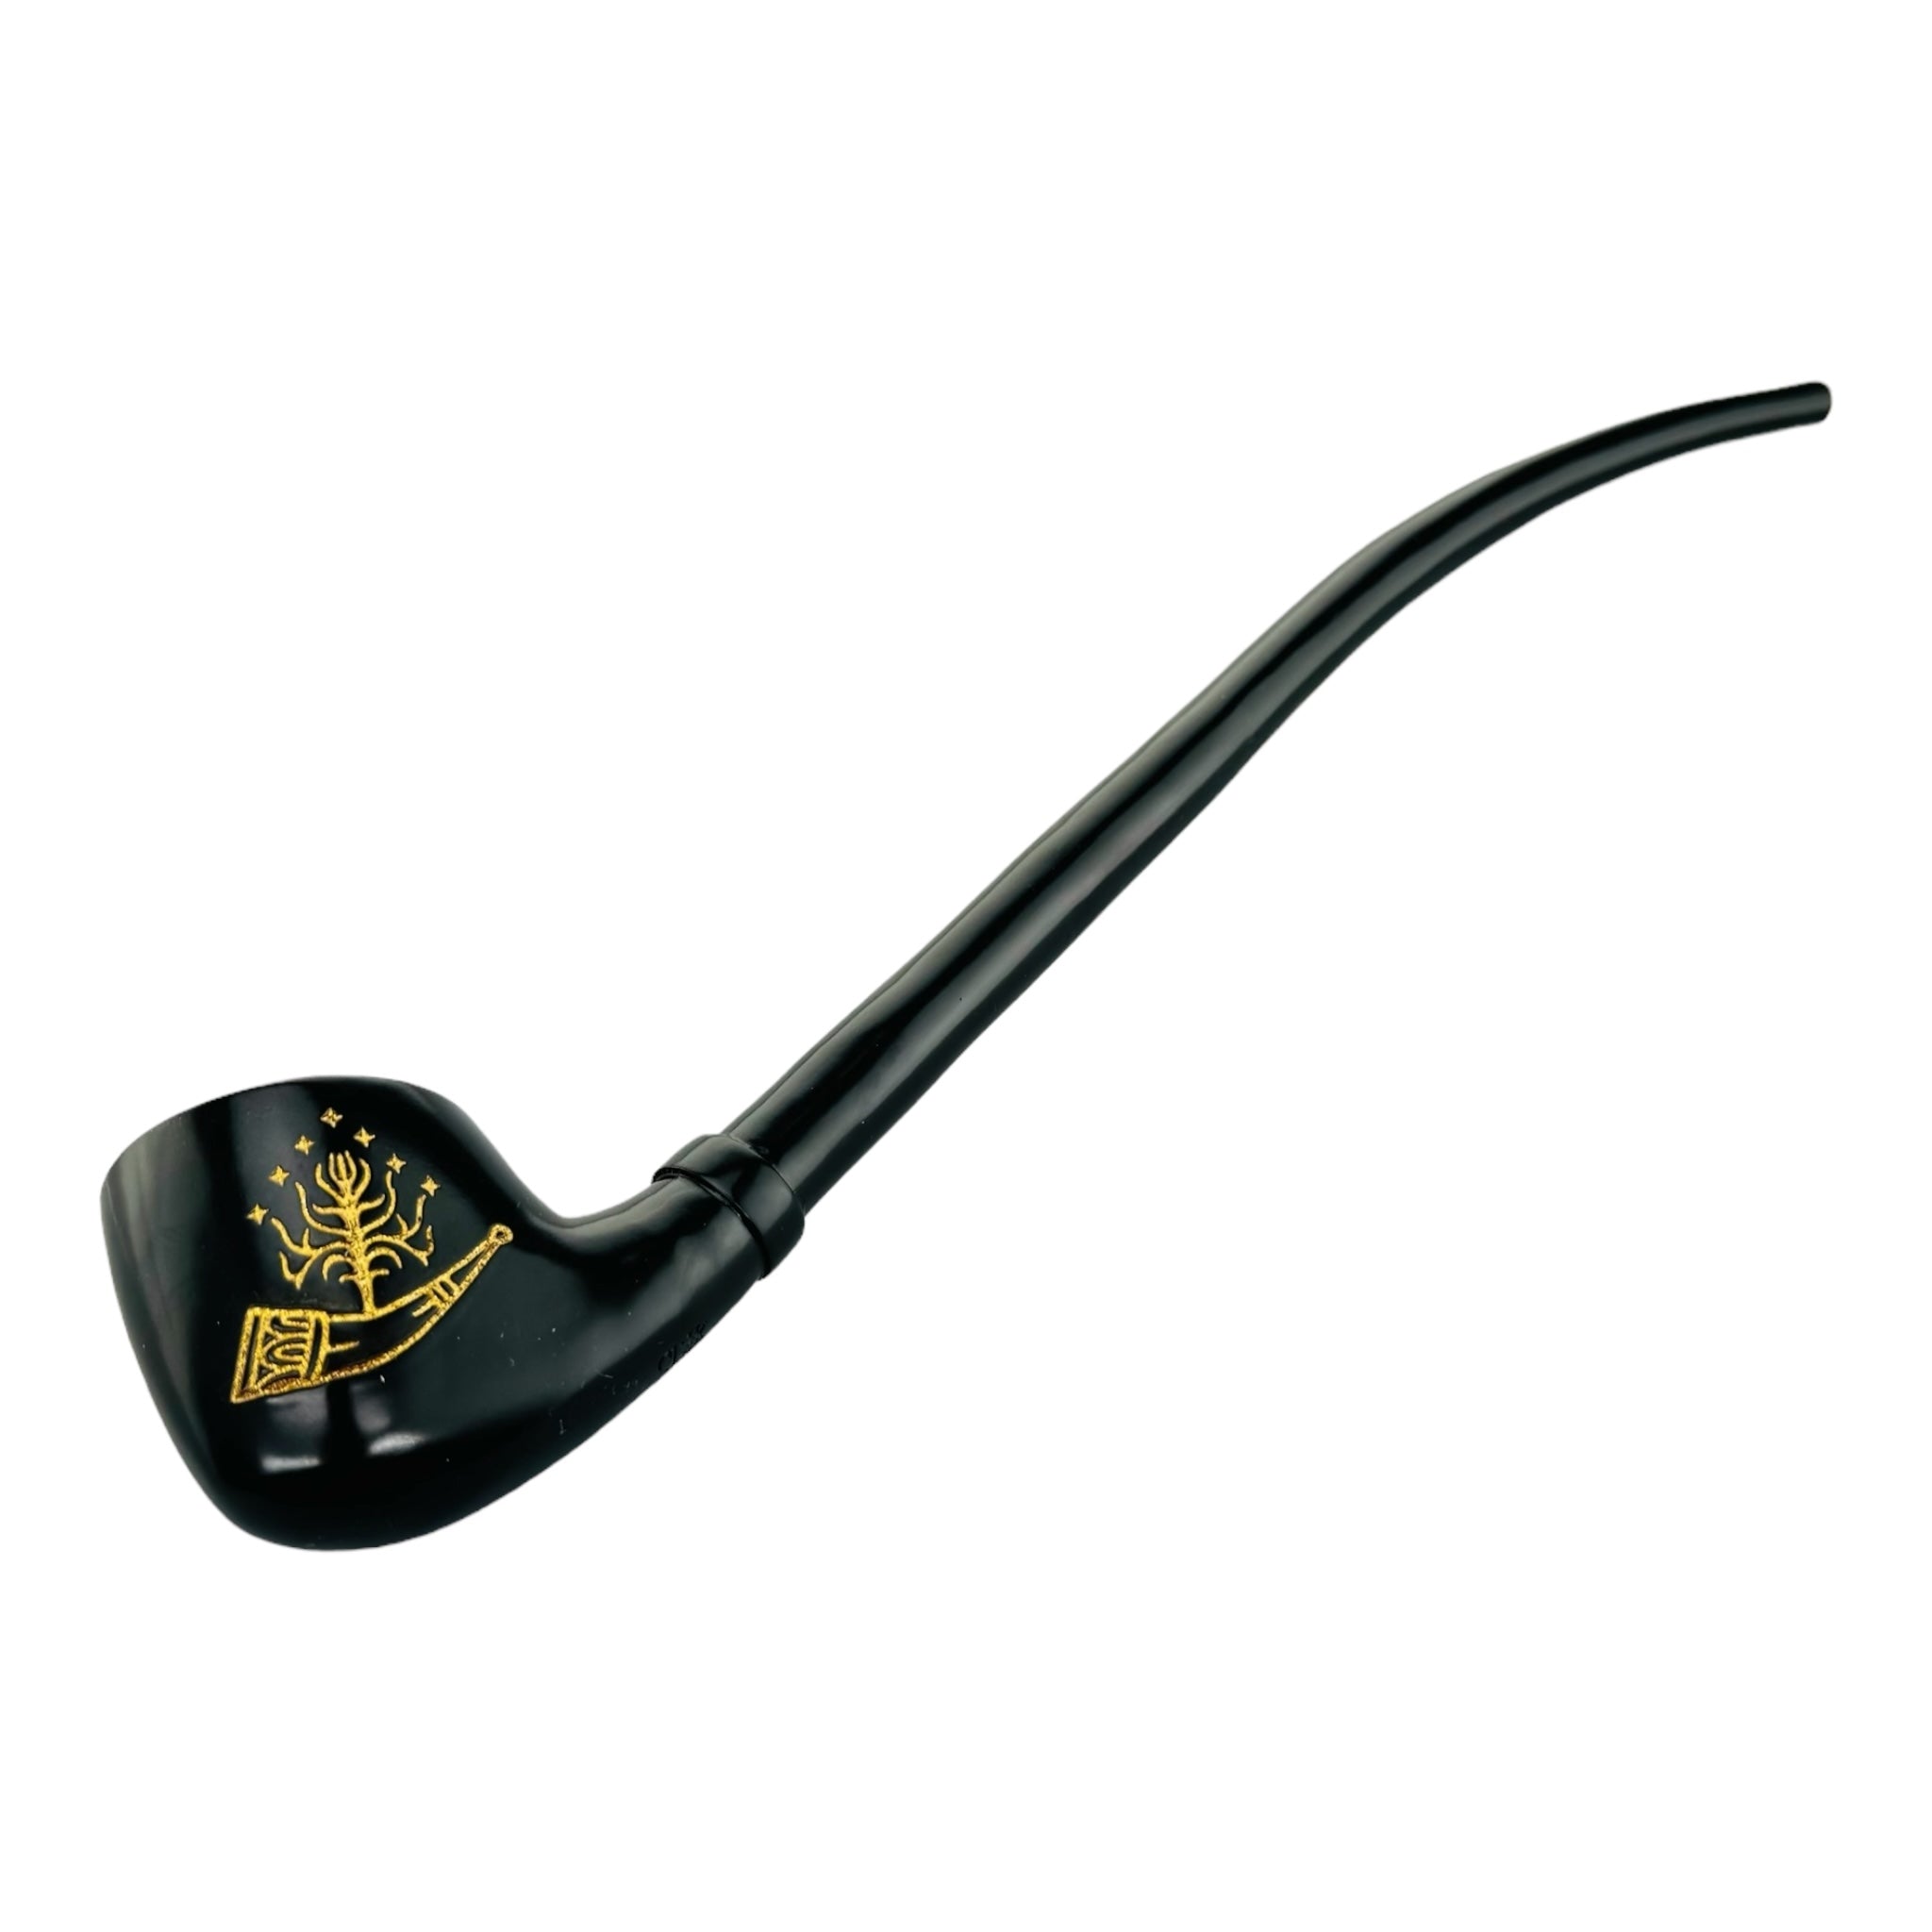 lord of the rings hobbit tobacco and pipe weed smoking pipe for sale